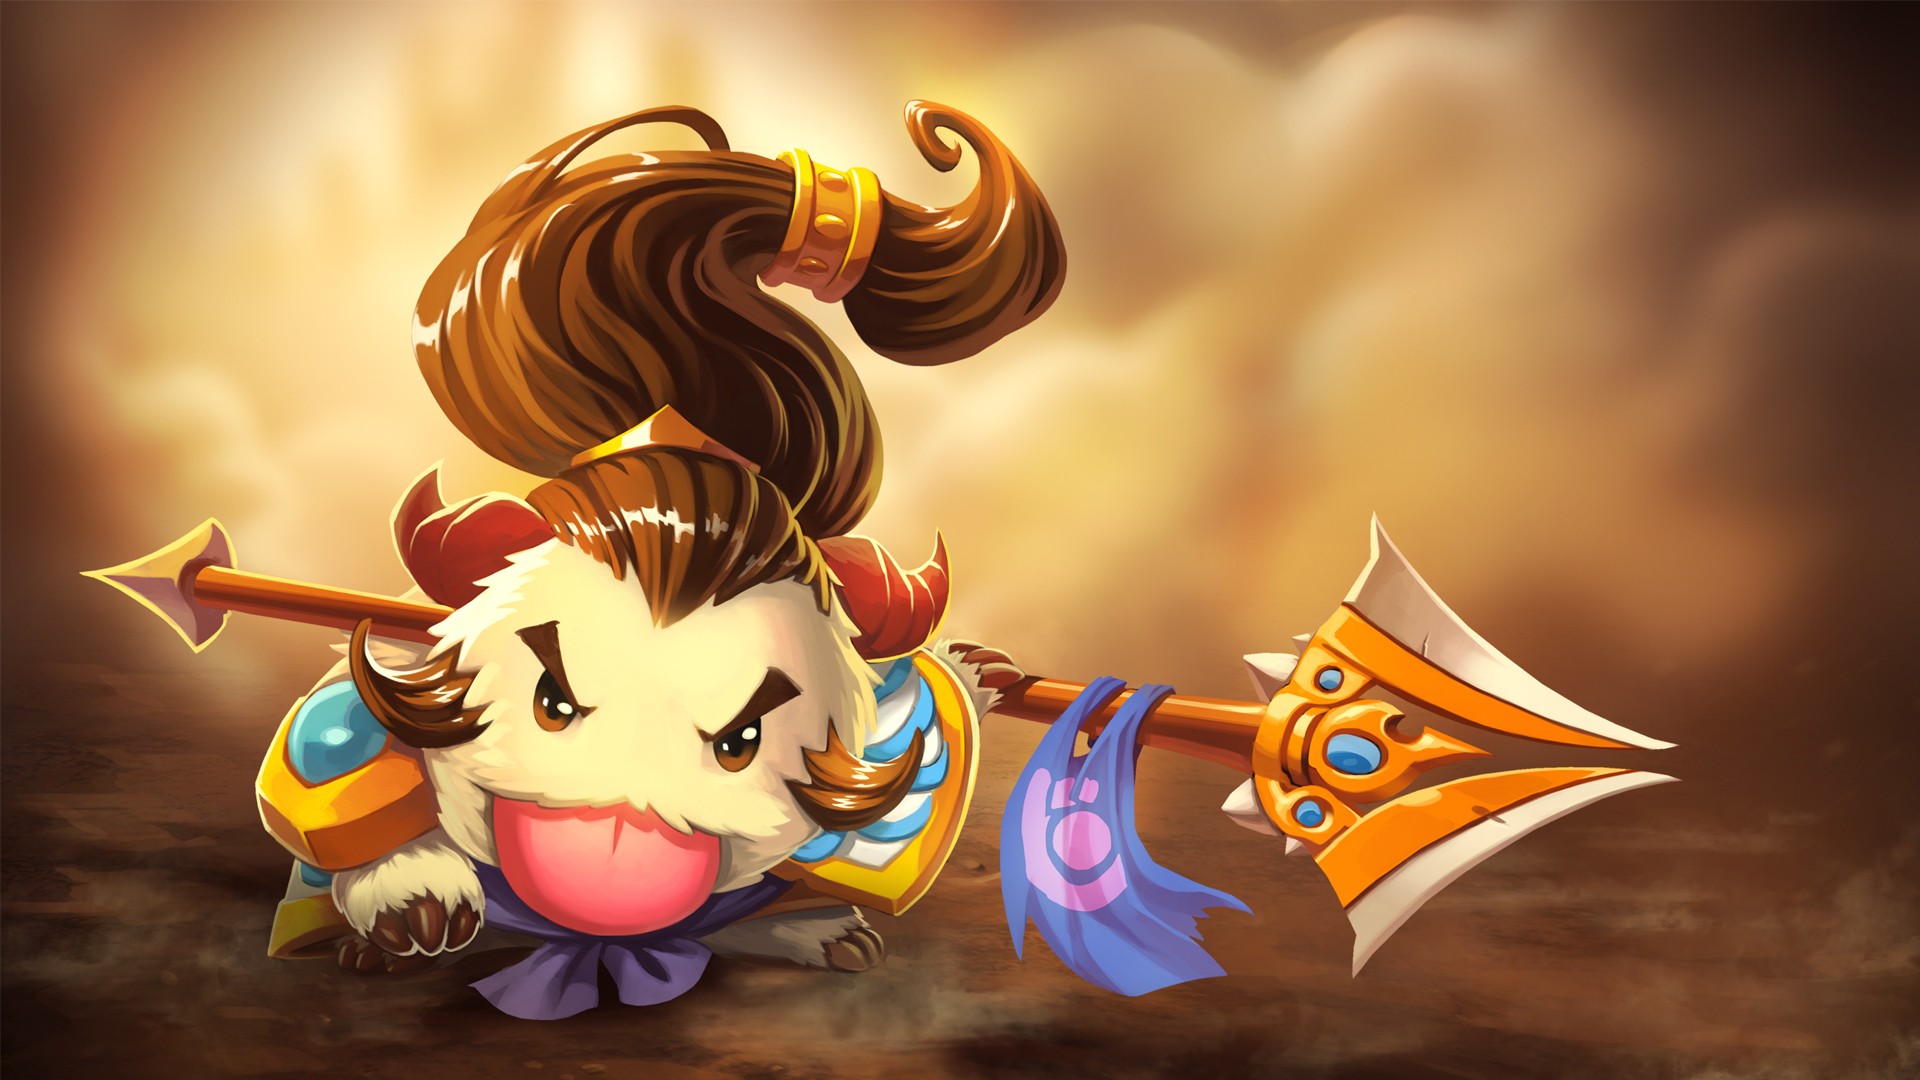 General 1920x1080 League of Legends video game art Xin Zhao (League of Legends) Poro (League of Legends) PC gaming video game characters digital art